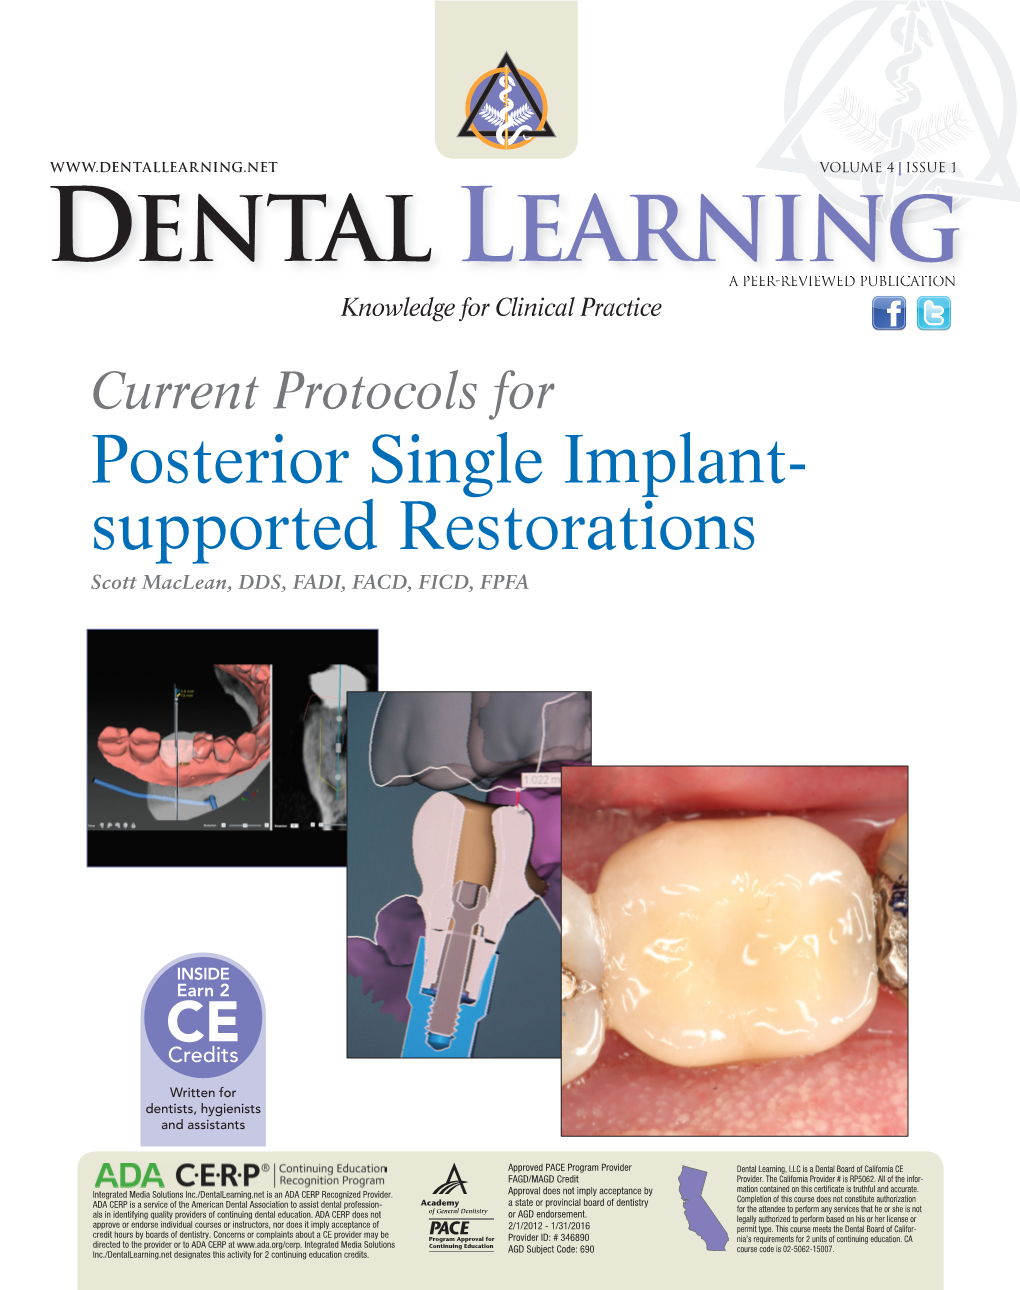 Current Protocols for Posterior Single Implant-Supported Restorations